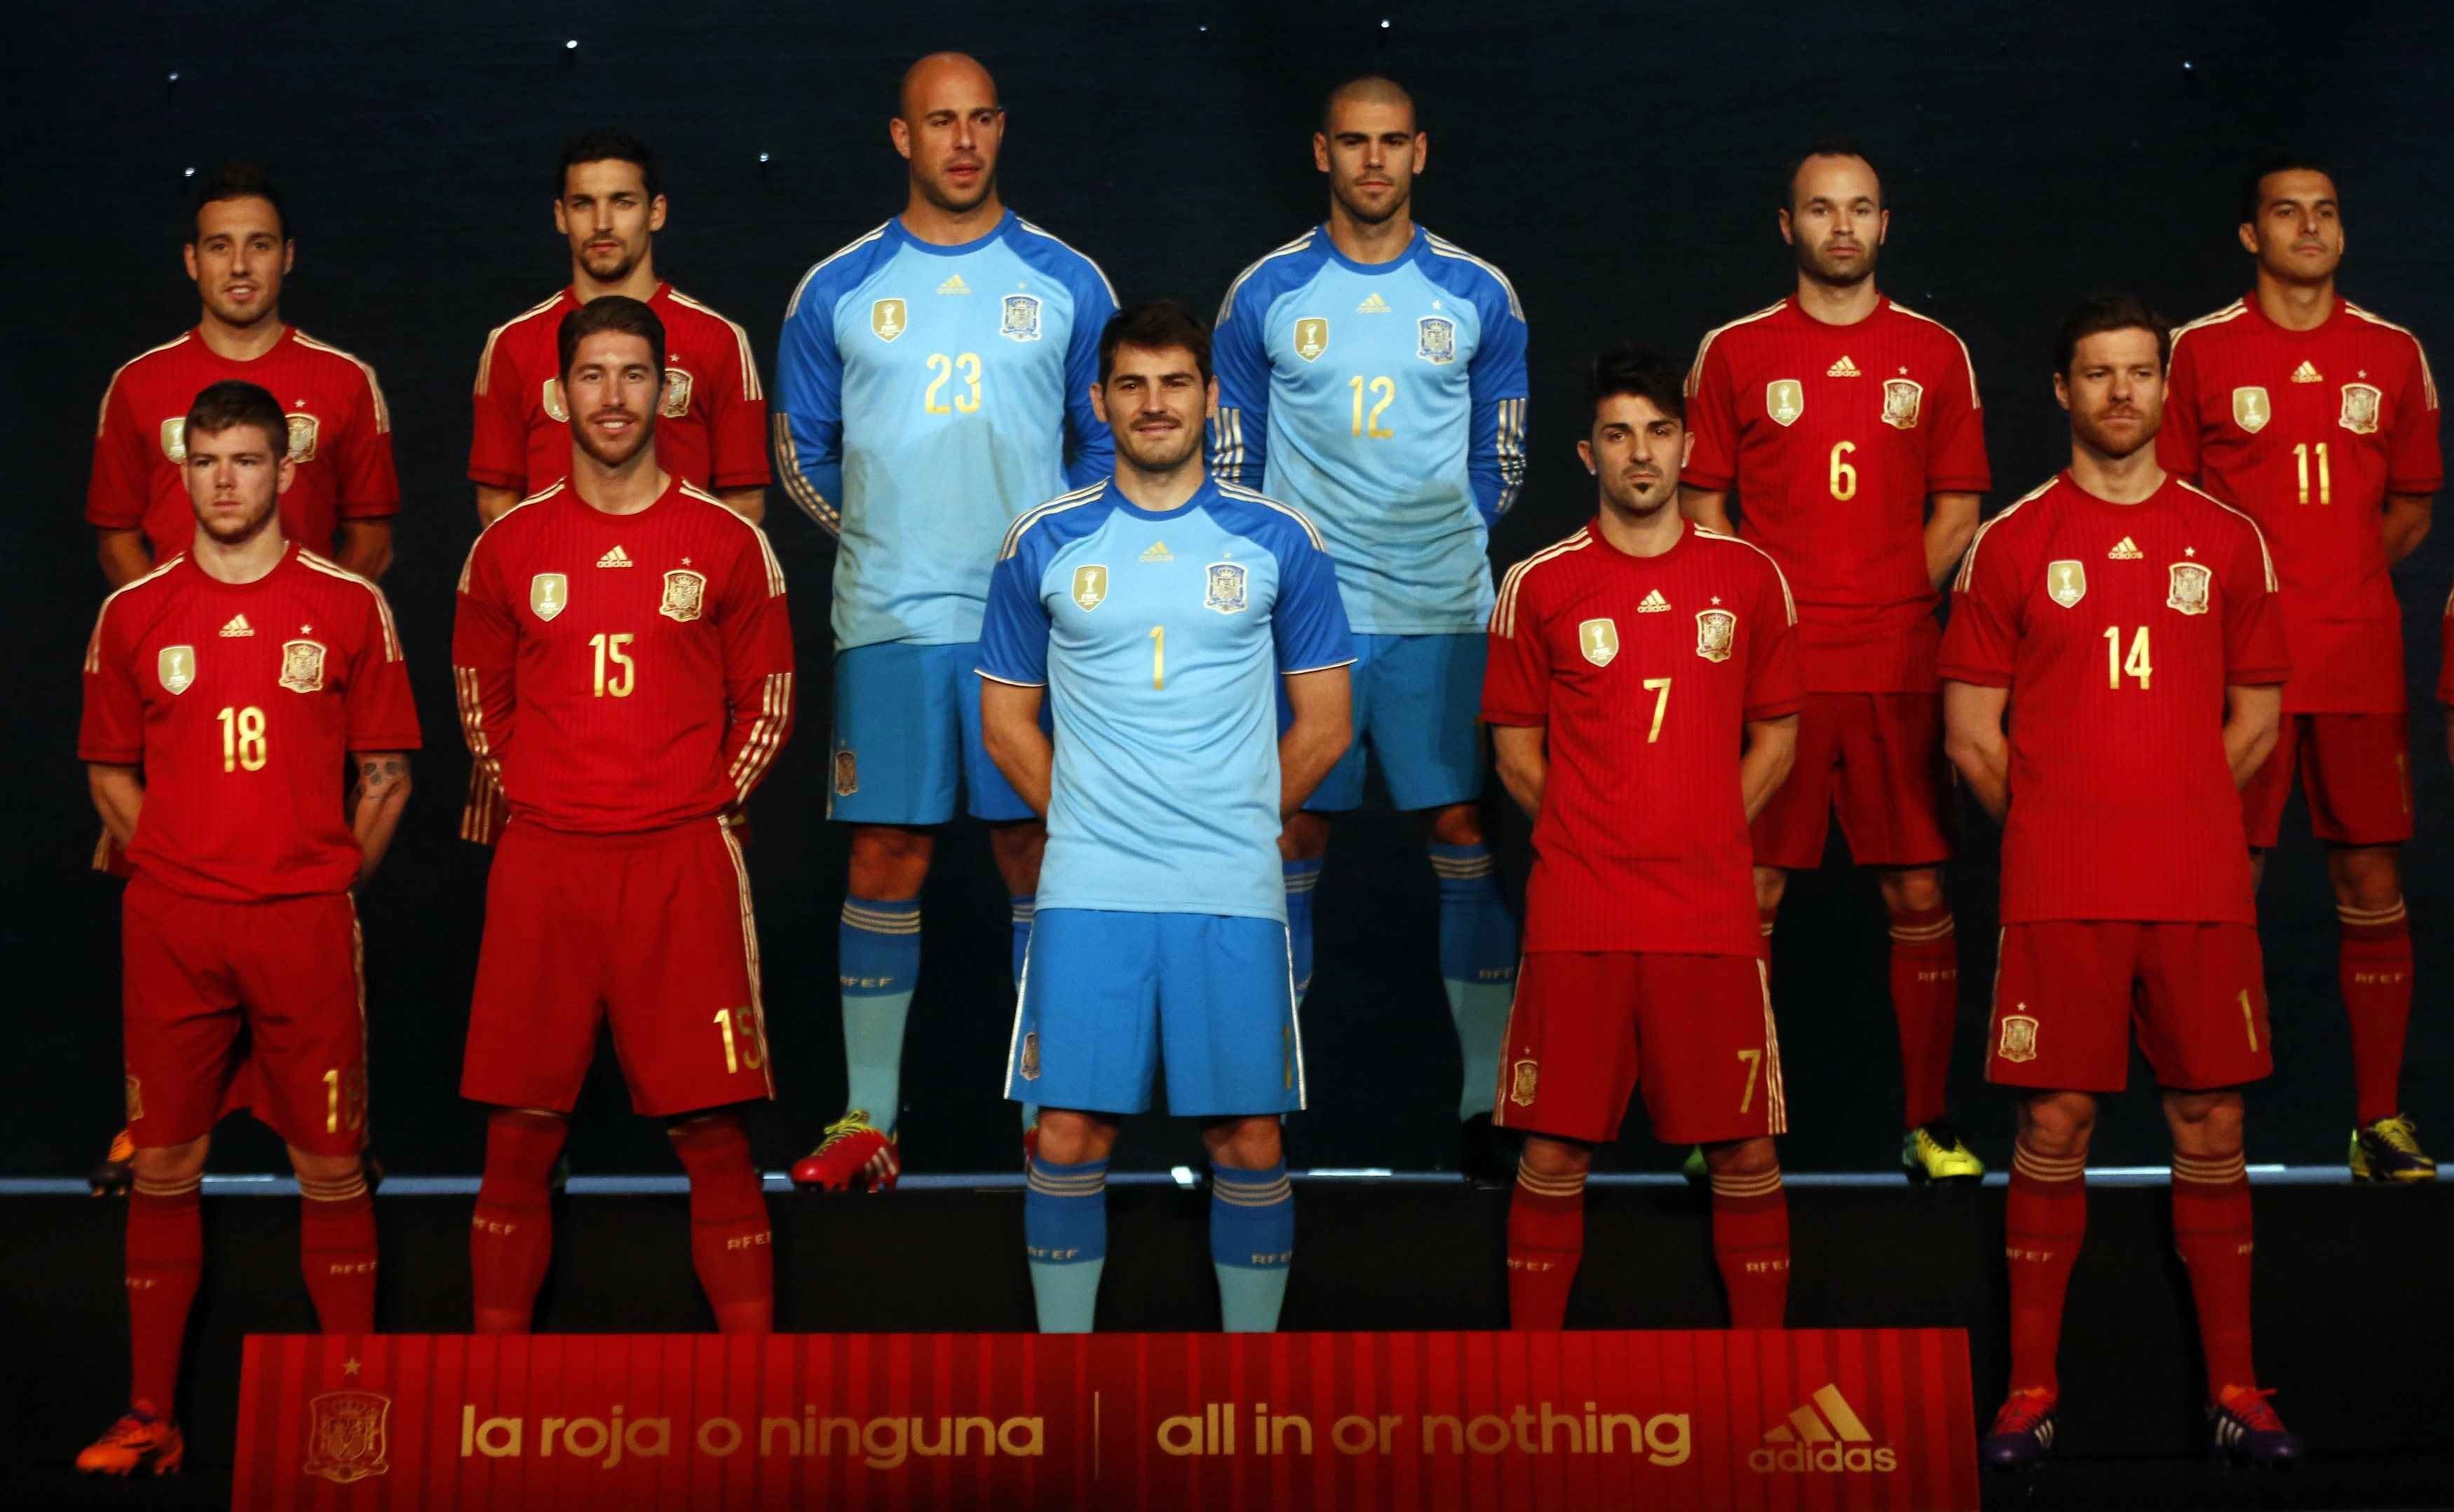 Spain Soccer Team Wallpaper background picture